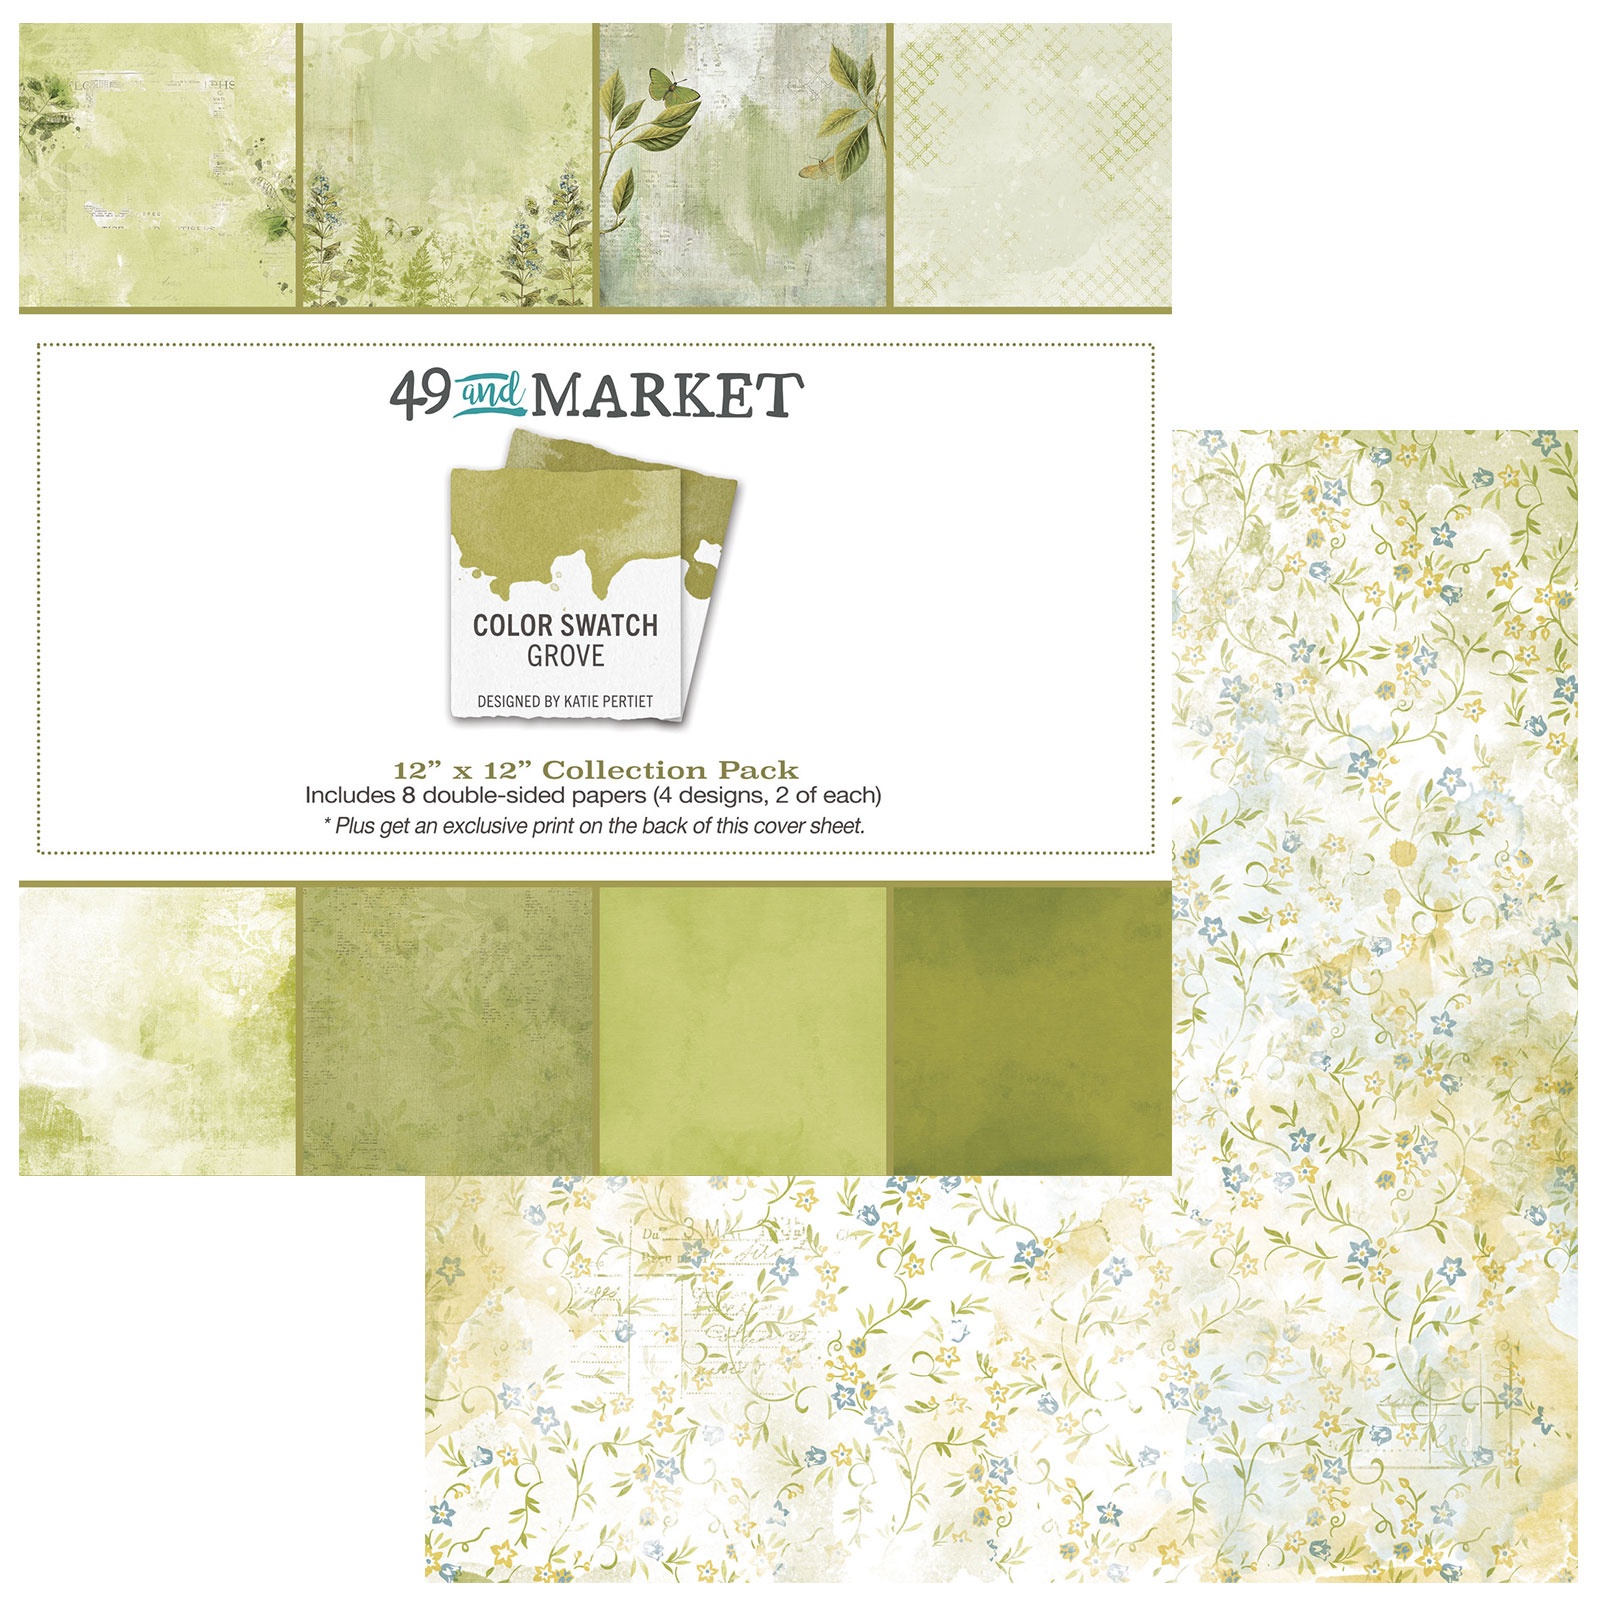 49 & Market Color Swatch Grove 12X 12 Collection